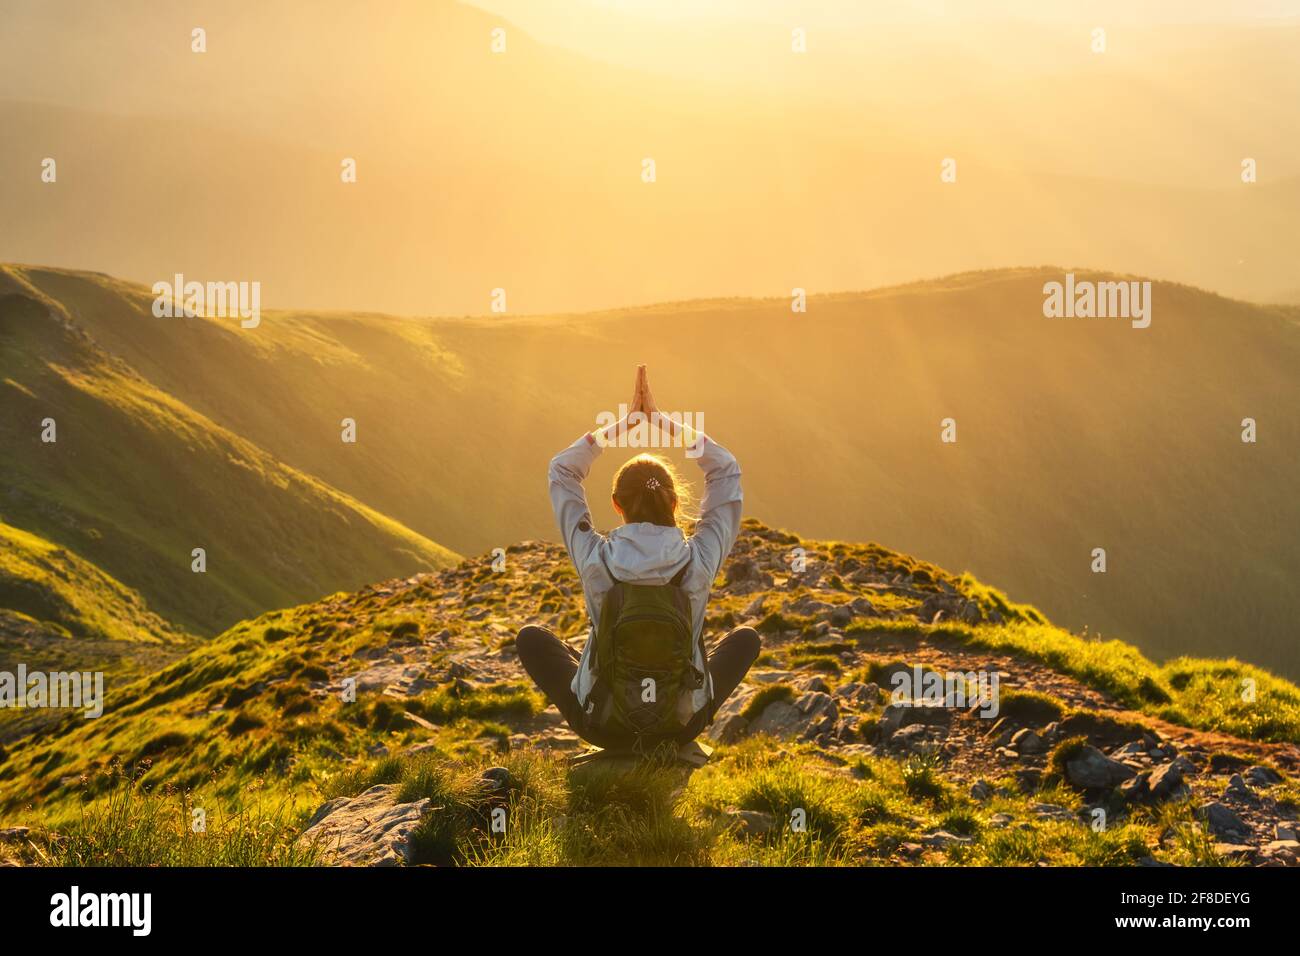 Young woman with backpack sitting on the mountain peak Stock Photo